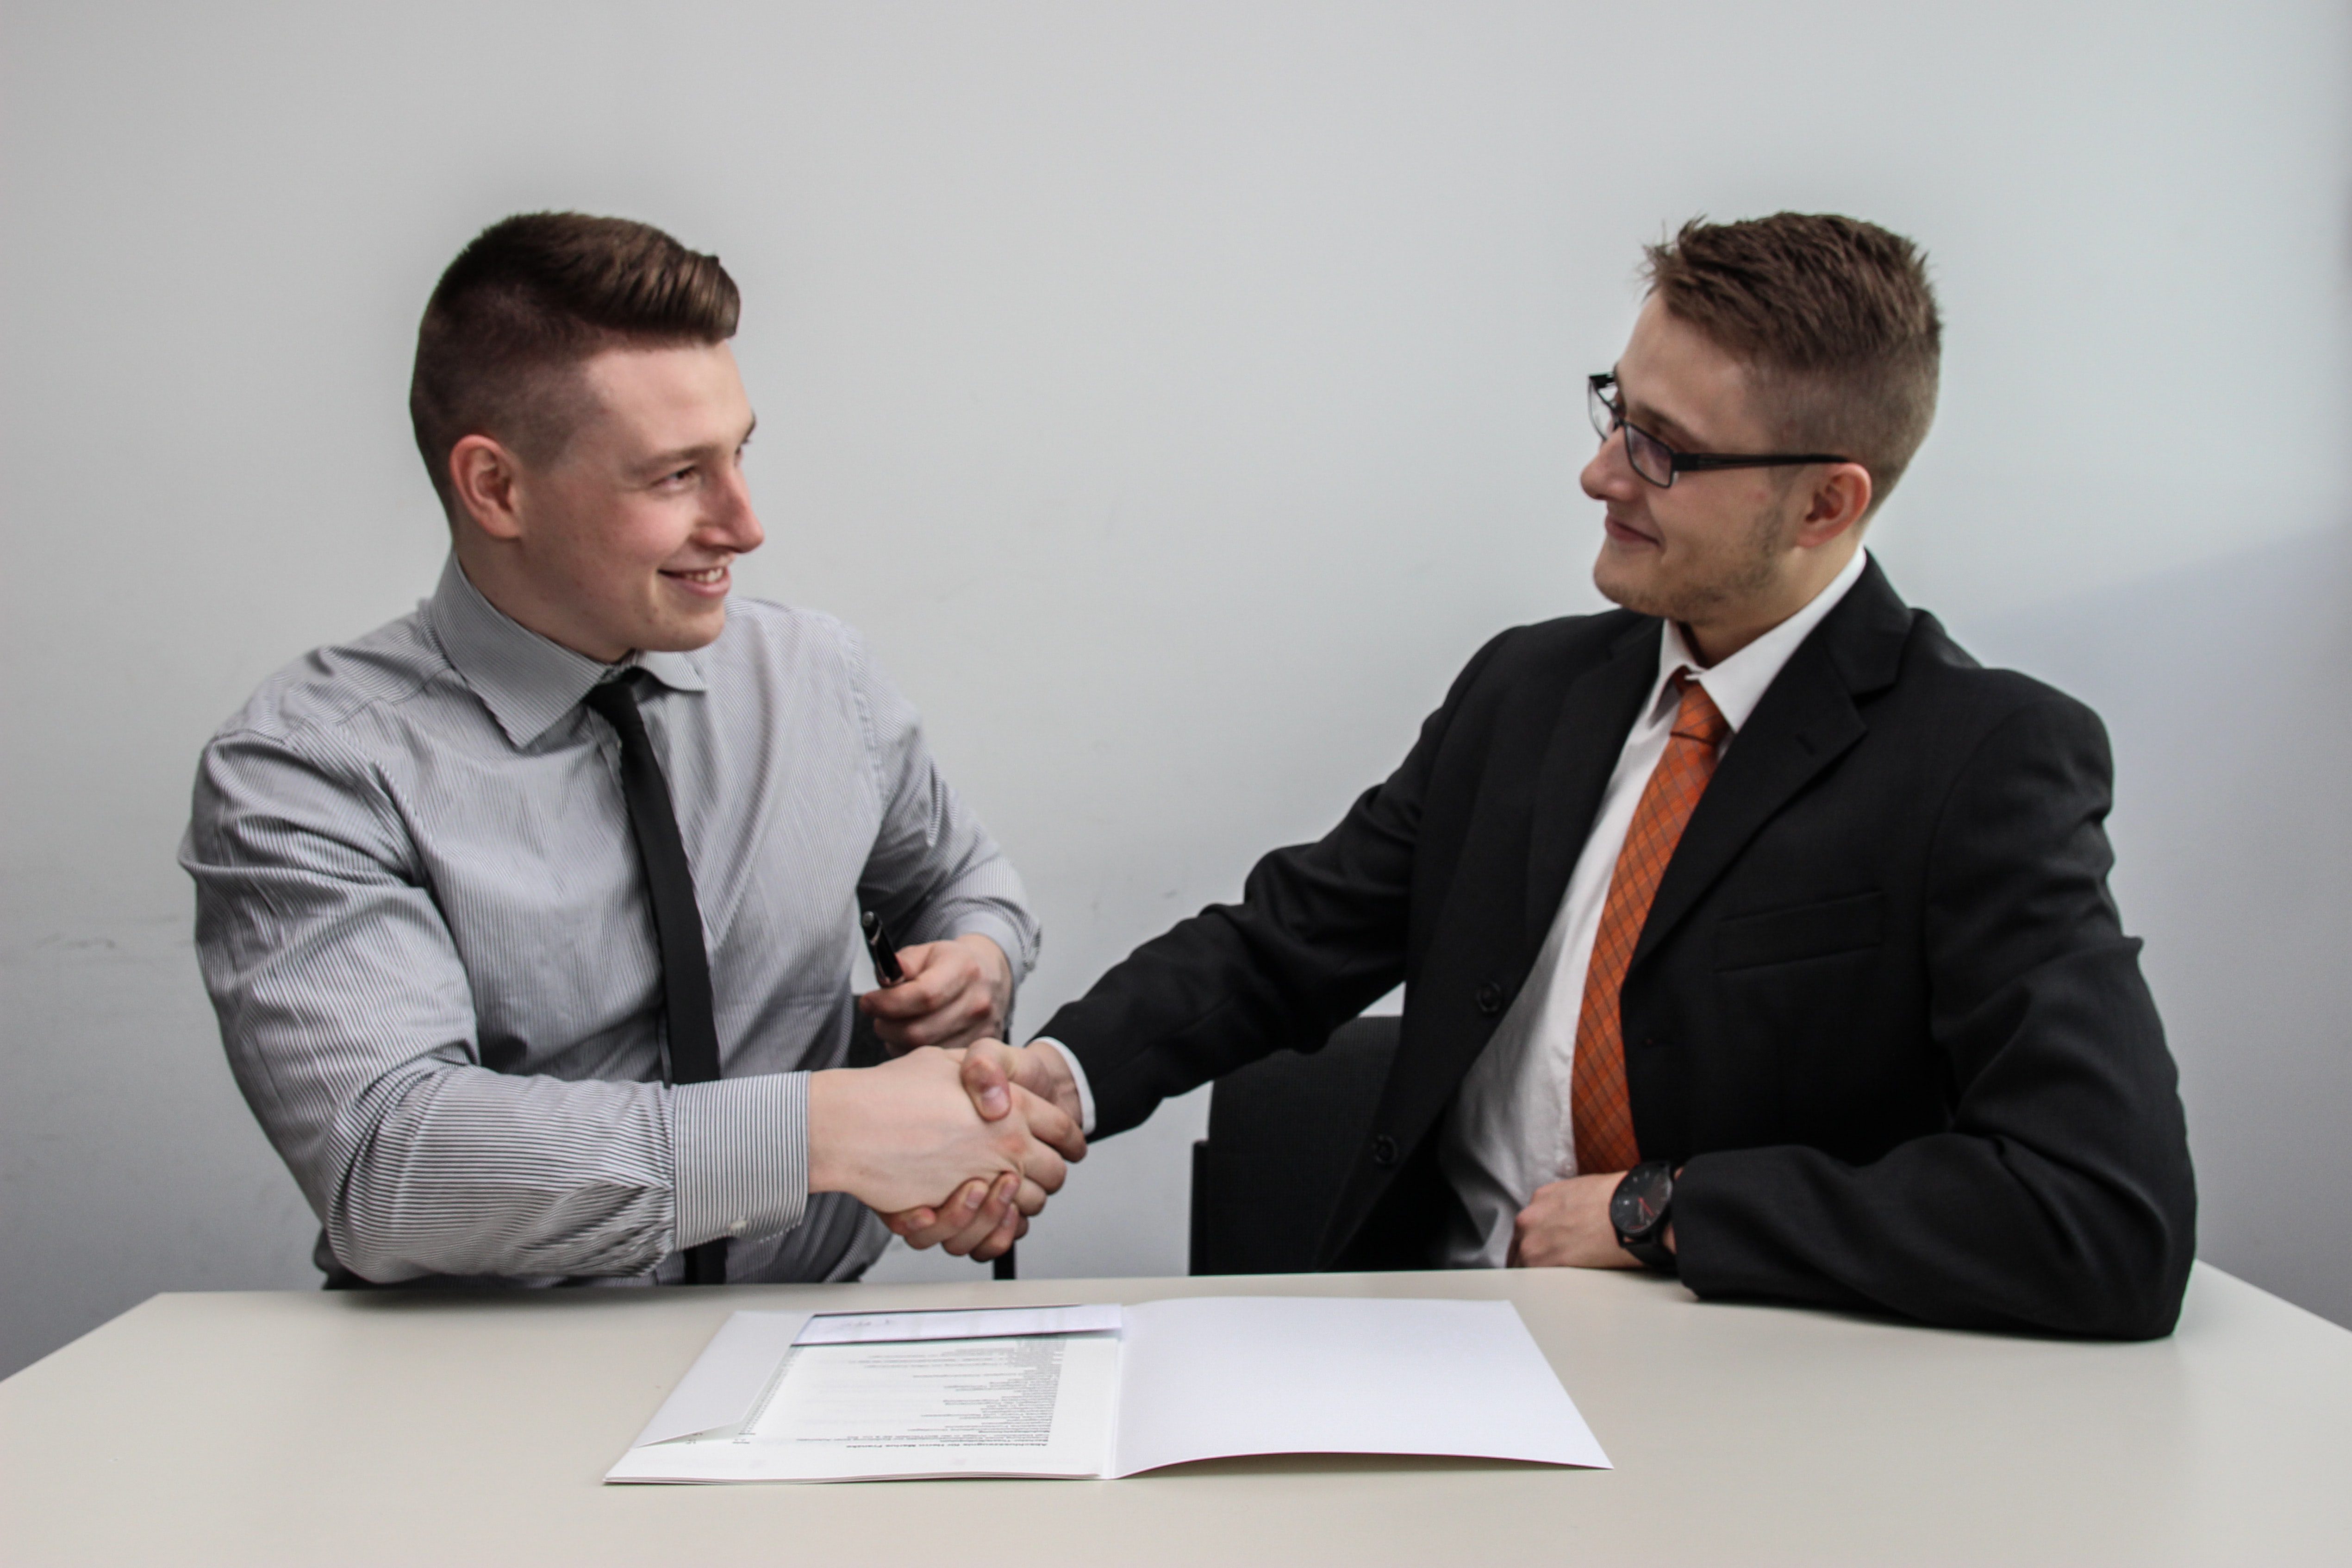 Non-Compete Agreement Contract